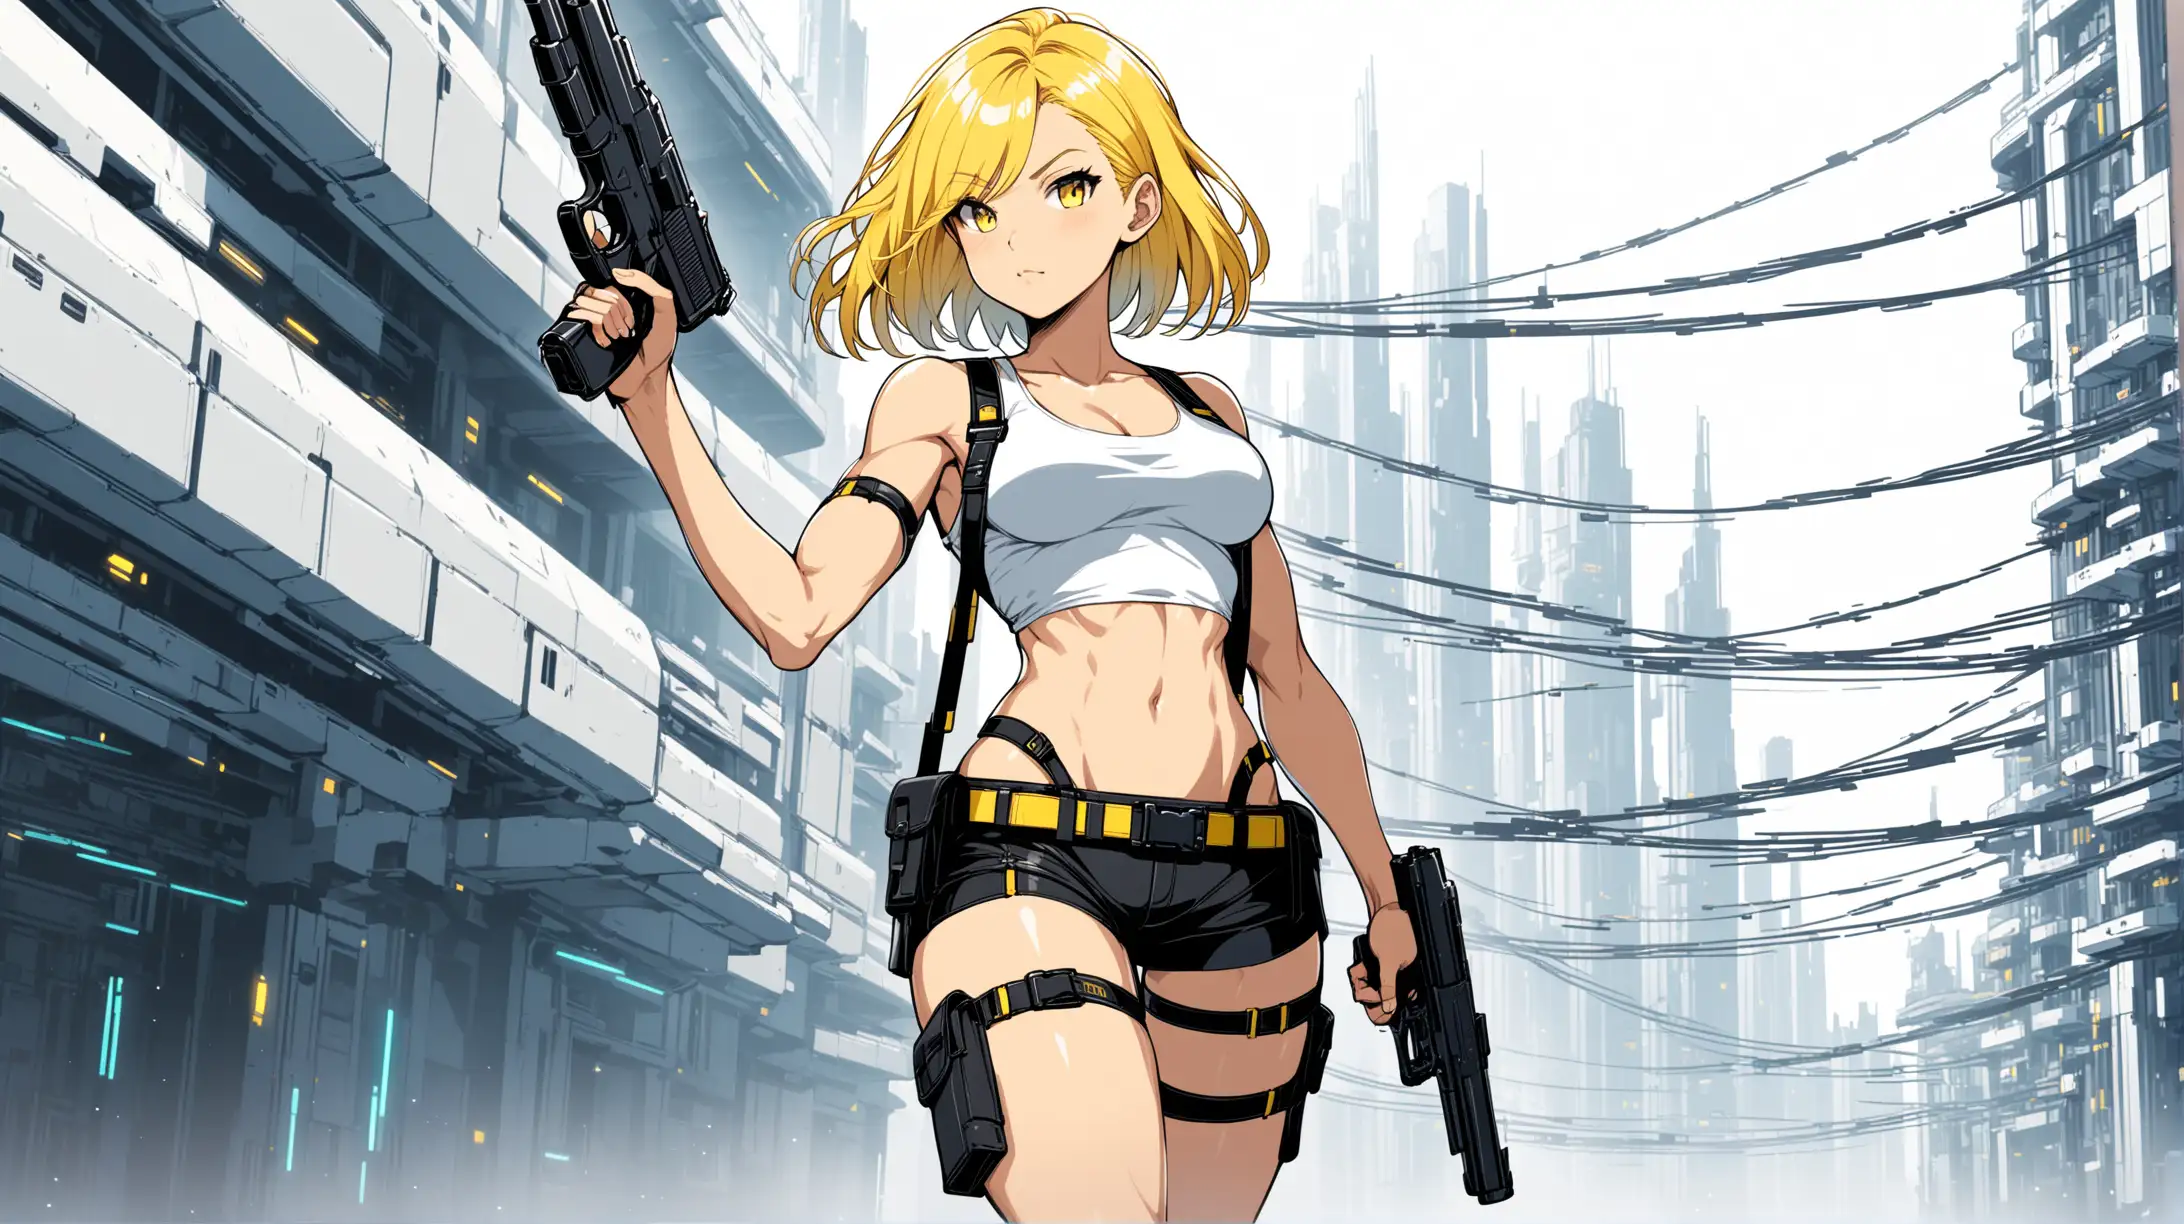 sexy fit 24 year old hero girl, short chin length yellow hair, holding handguns up in each hand in futuristic town, toned body, sexy midriff, short white tank top, wearing suspenders, black shorts, holsters on each thigh, combat boots, yellow black white 3 color minimal design